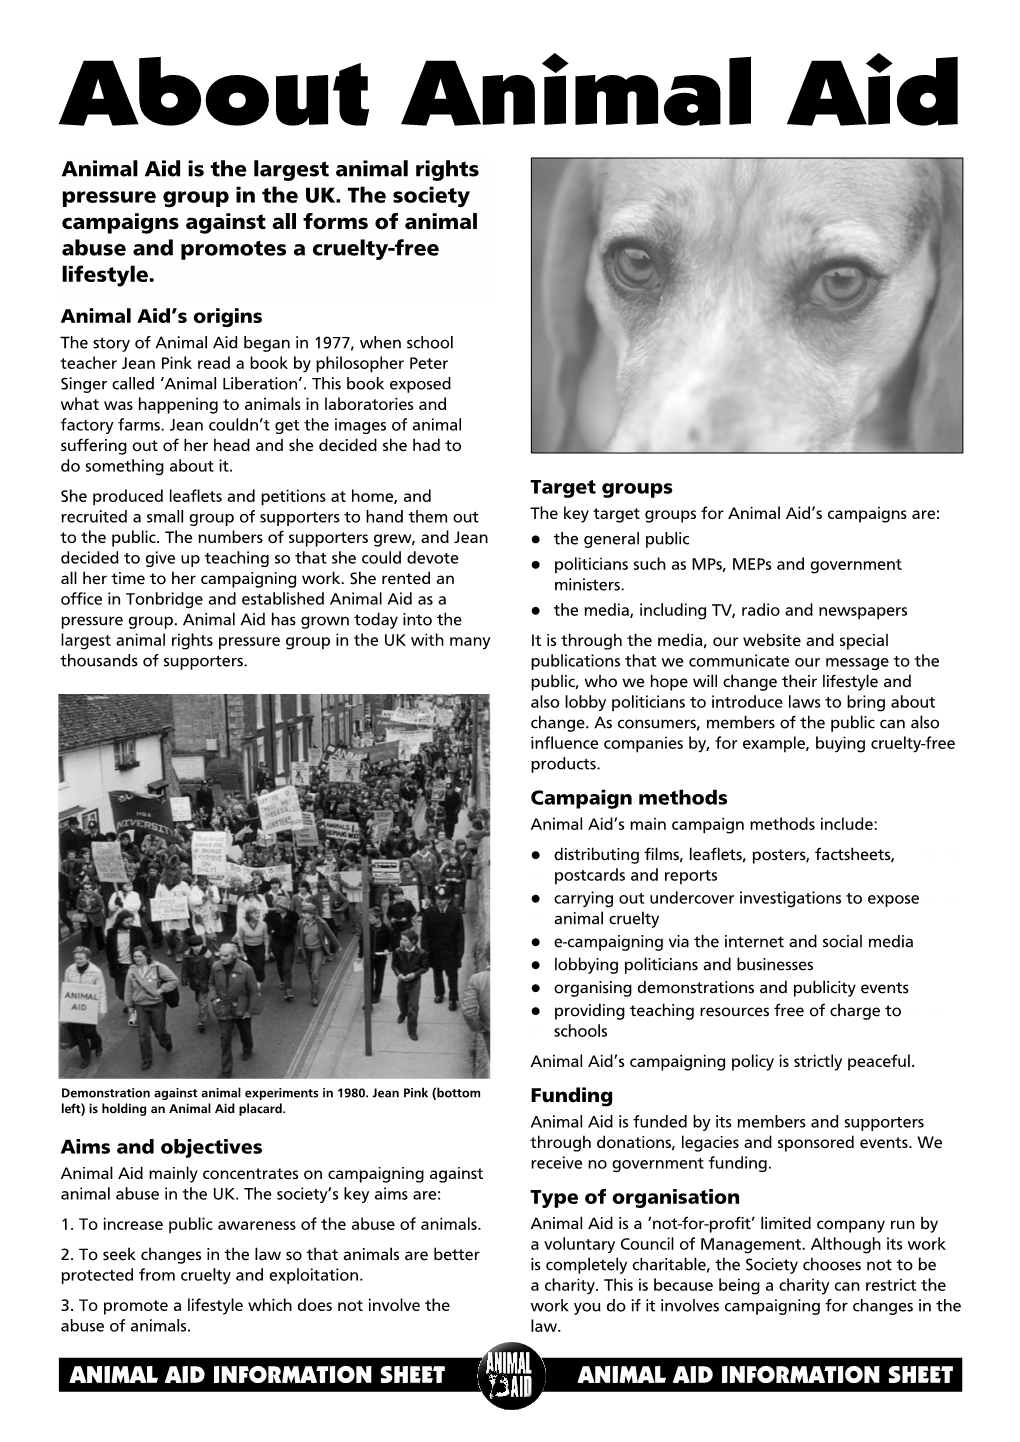 About Animal Aid Animal Aid Is the Largest Animal Rights Pressure Group in the UK